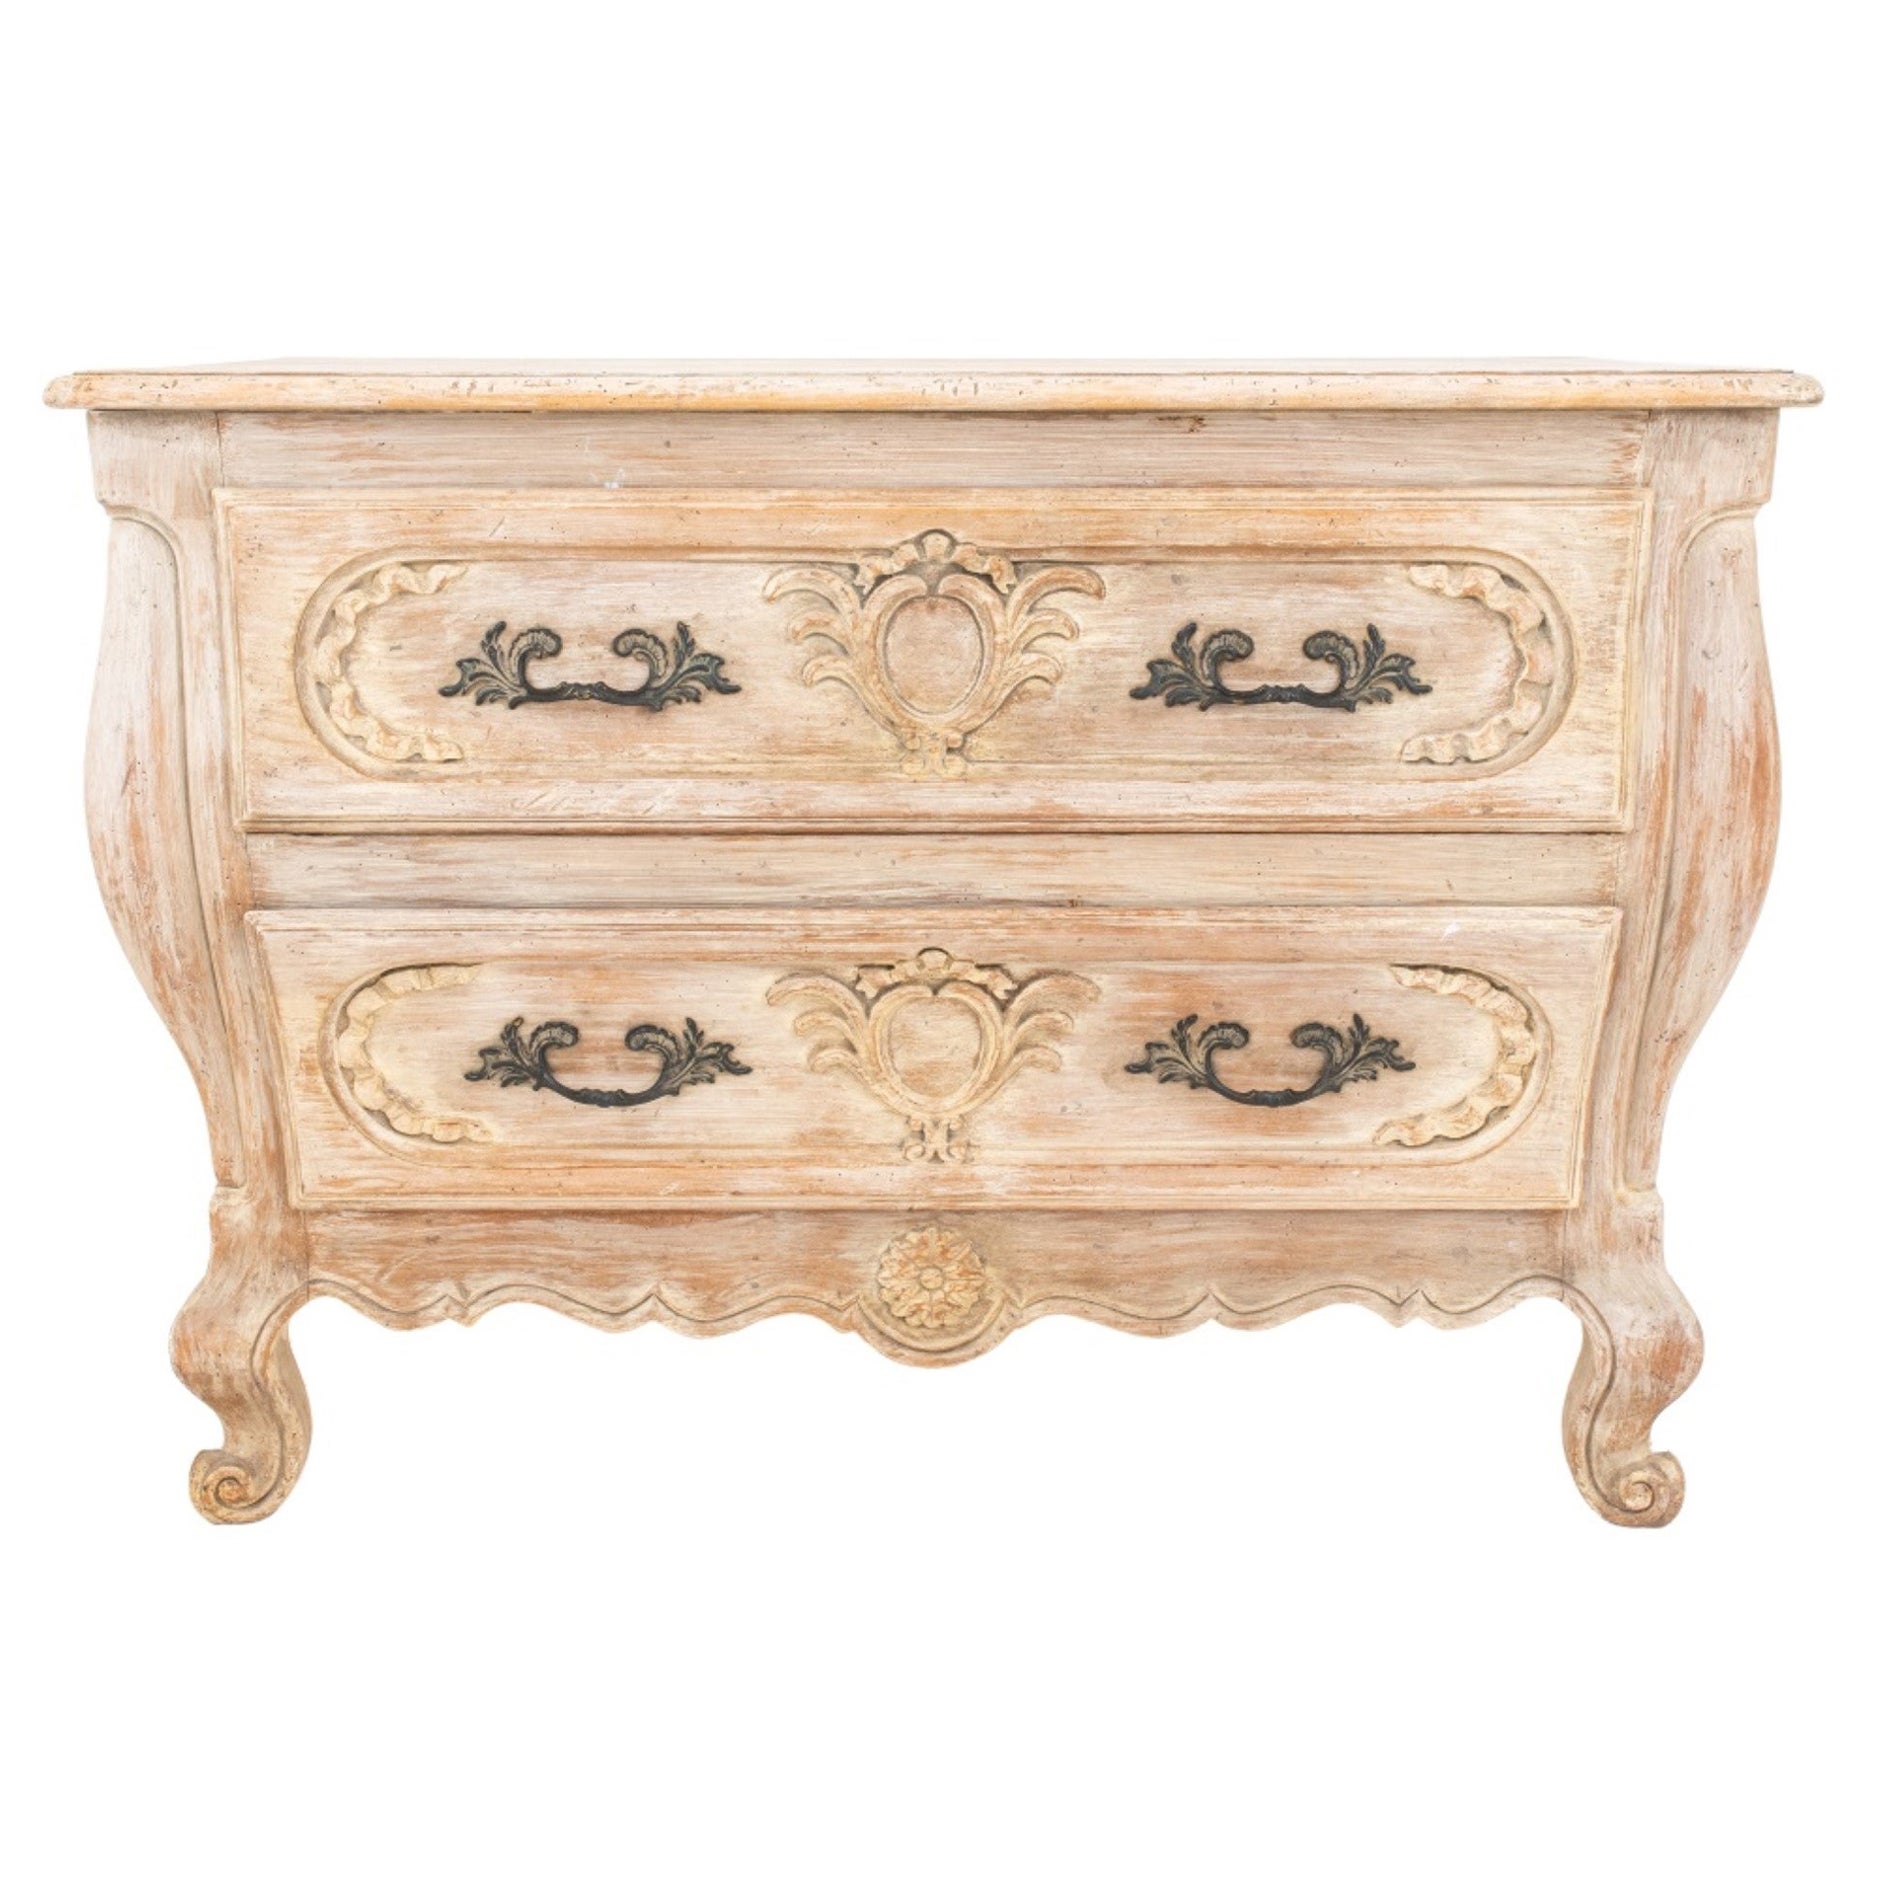 French Provincial Style Bombe Zwei Schubladen Kommode